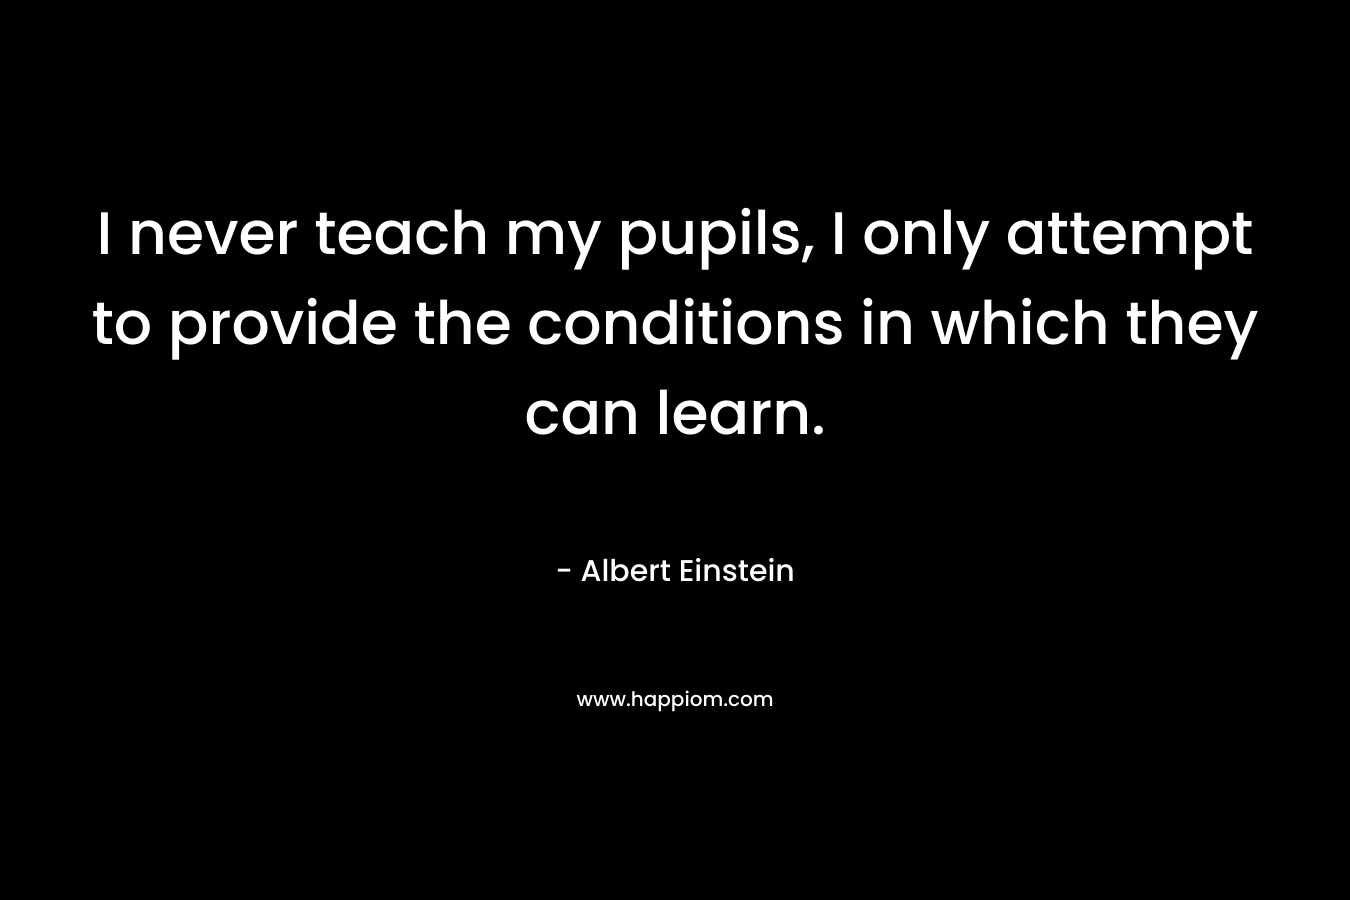 I never teach my pupils, I only attempt to provide the conditions in which they can learn.